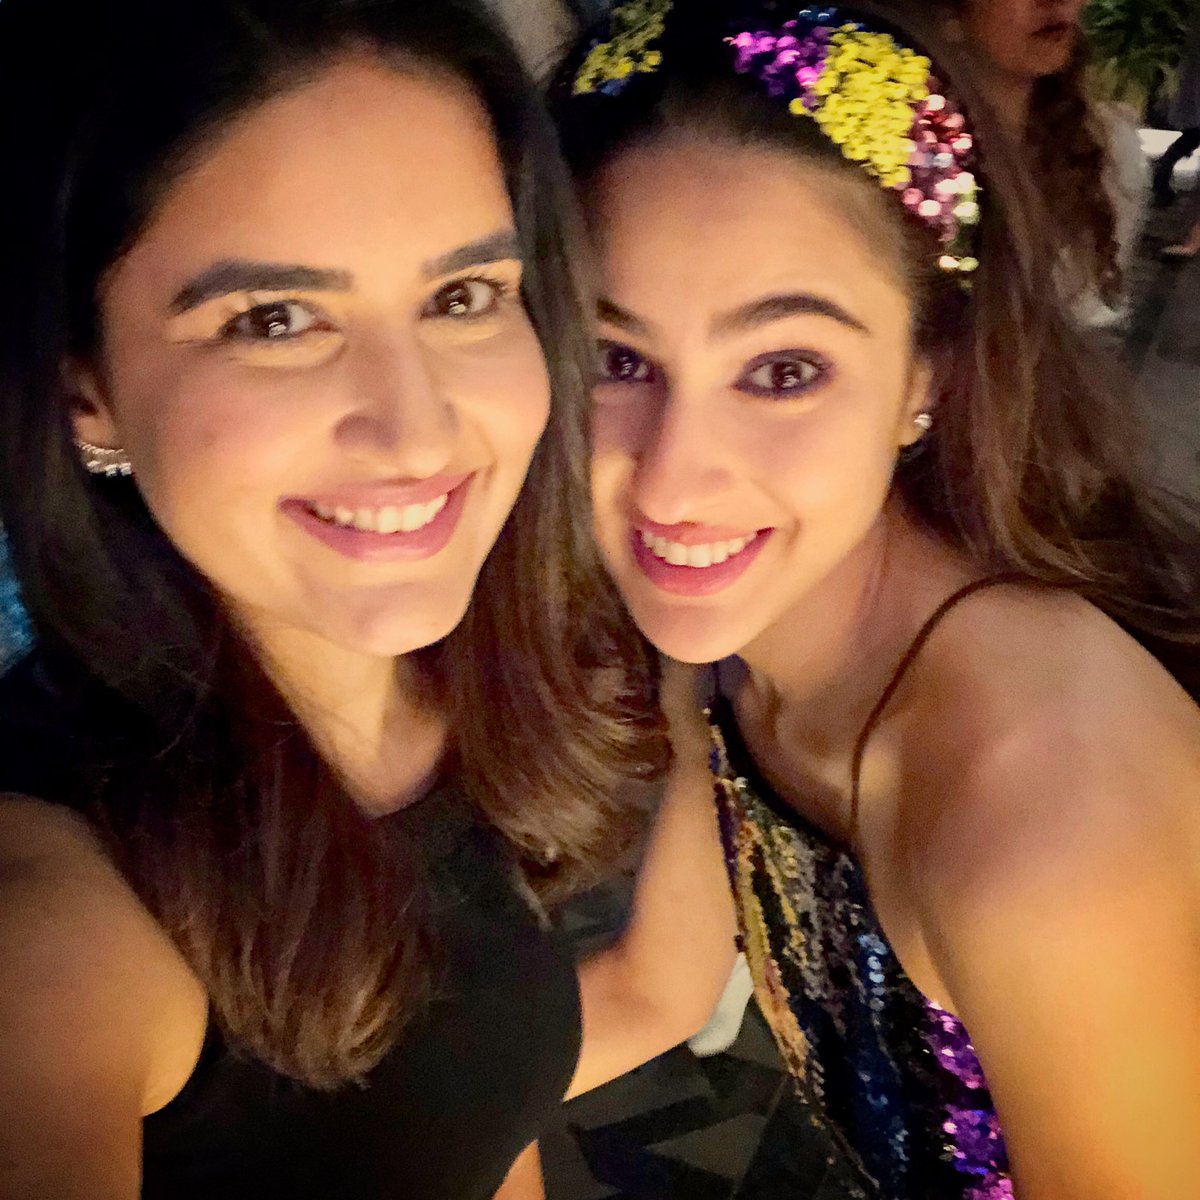 “The one with the heroine!”
@_SaraAliKhan ♥️
A very humble, matured person and yet a super fun Bambaiyya ladki...miles to go girl!!!
.
.
.
.
.
.
.
.
.
#simmba #successparty #couldnothaveaskedformore